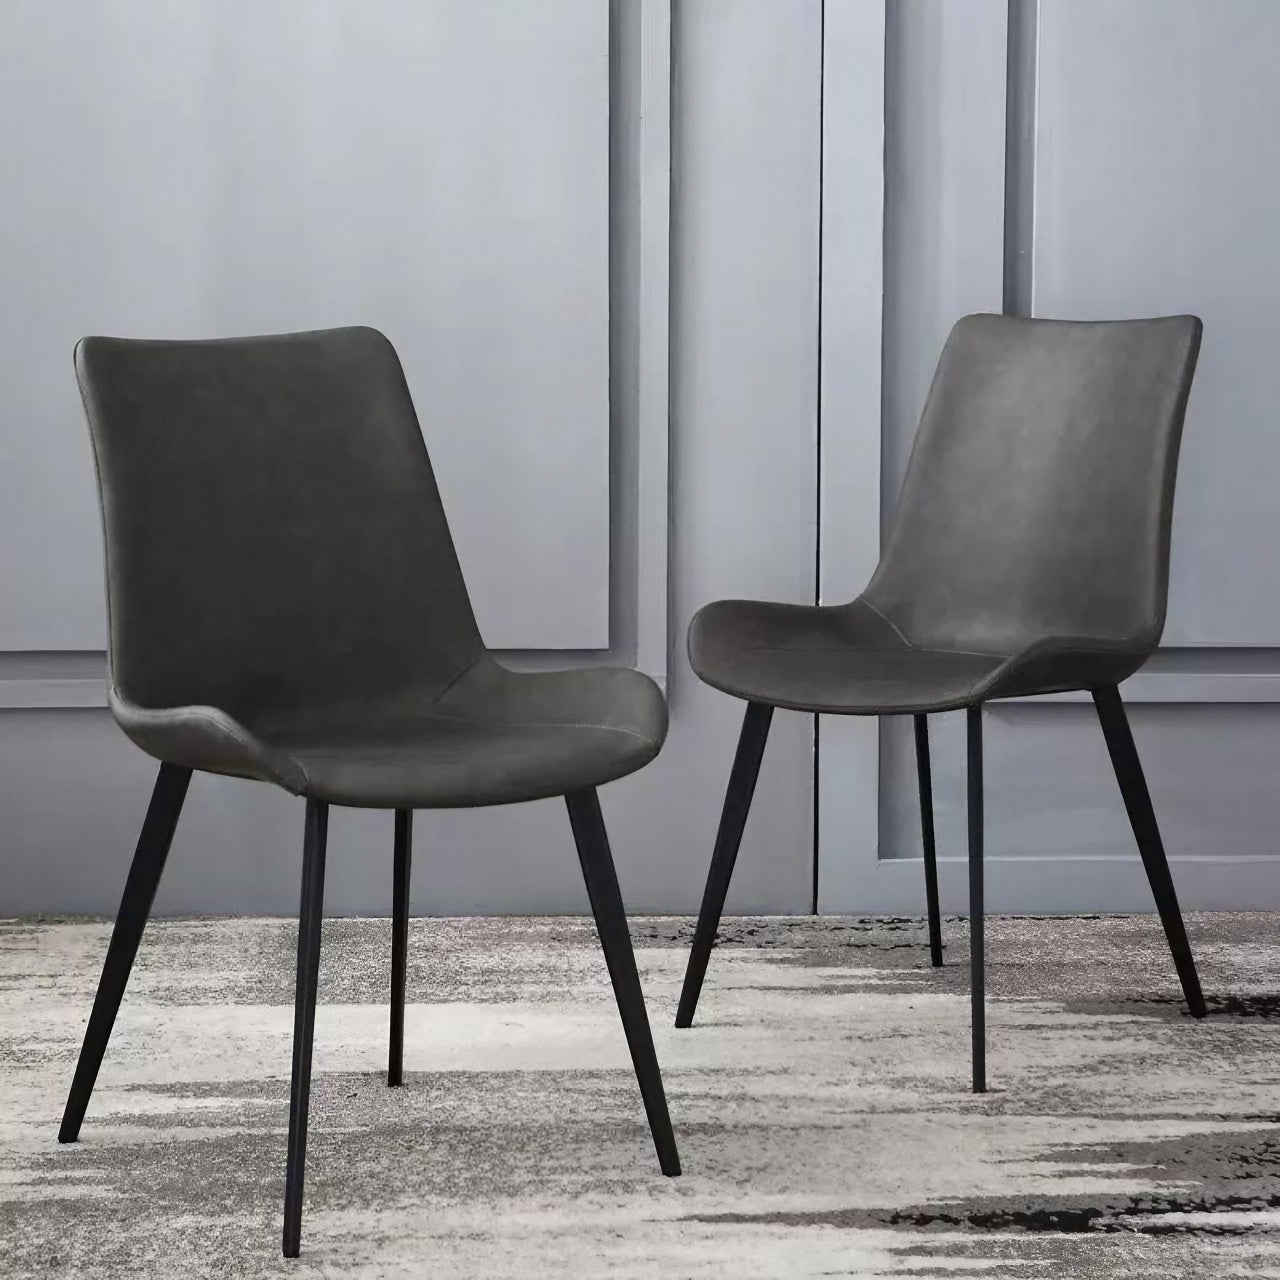 Modern black faux leather high-back chair with minimalist design for contemporary interiors